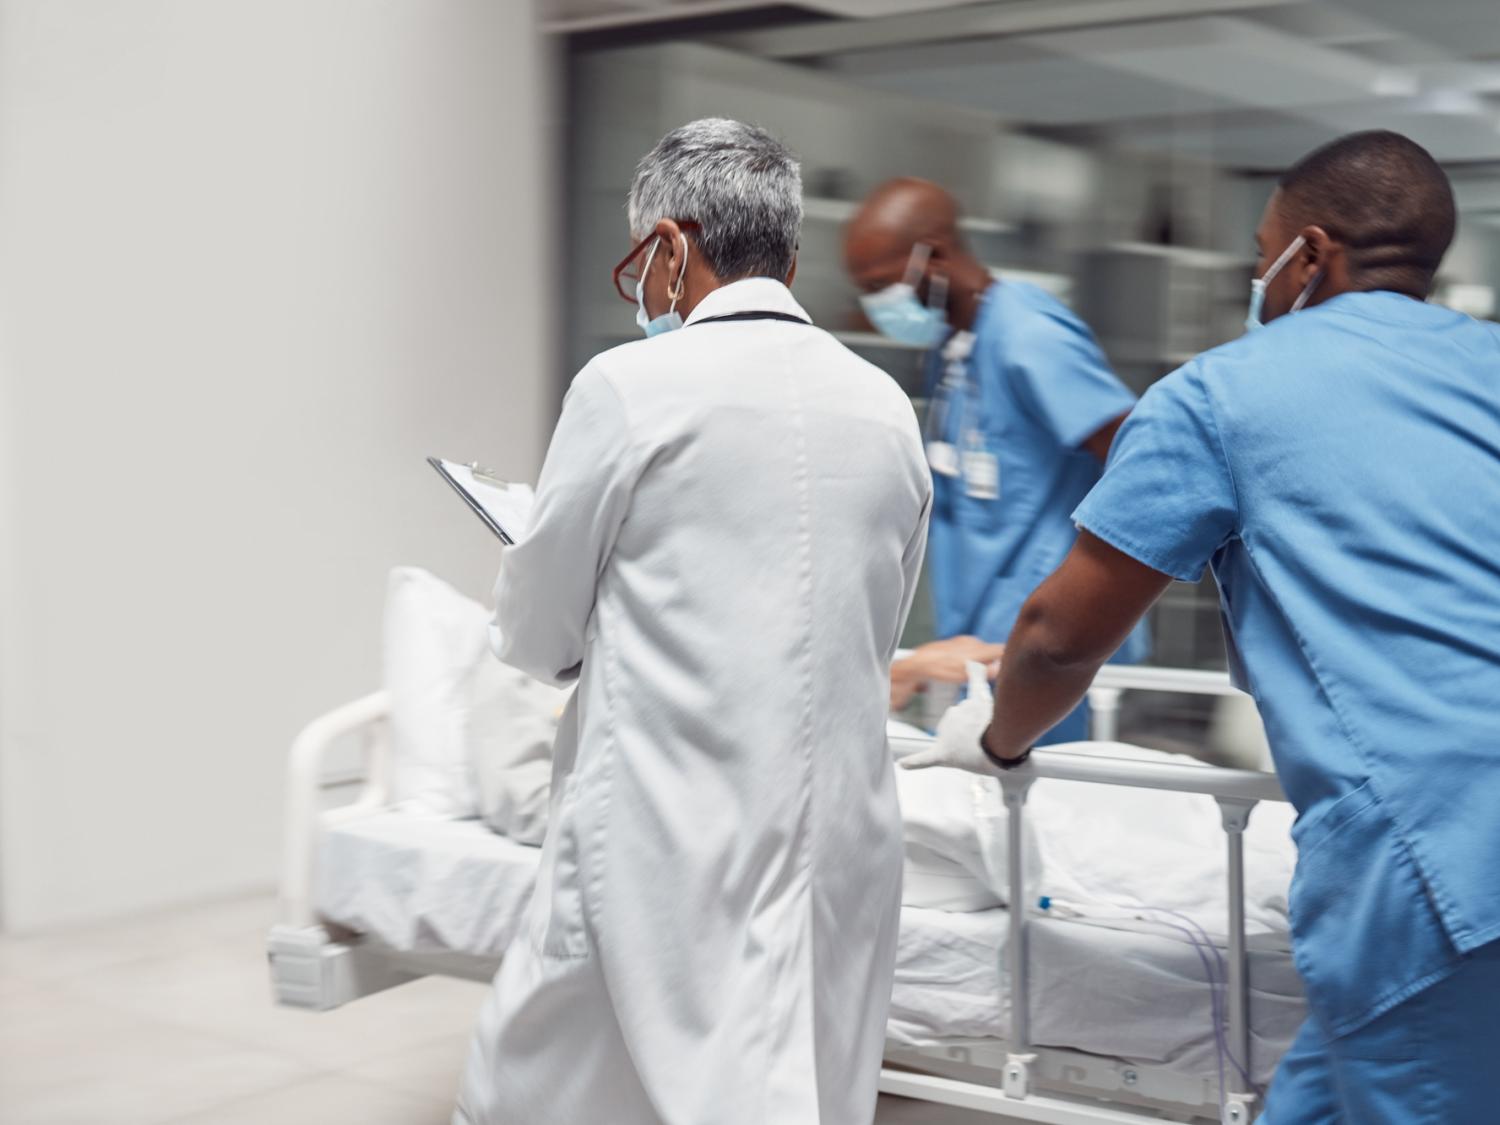 Emergency department staff in scrubs and lab coats hurridly move a patient through a hospital hallway.